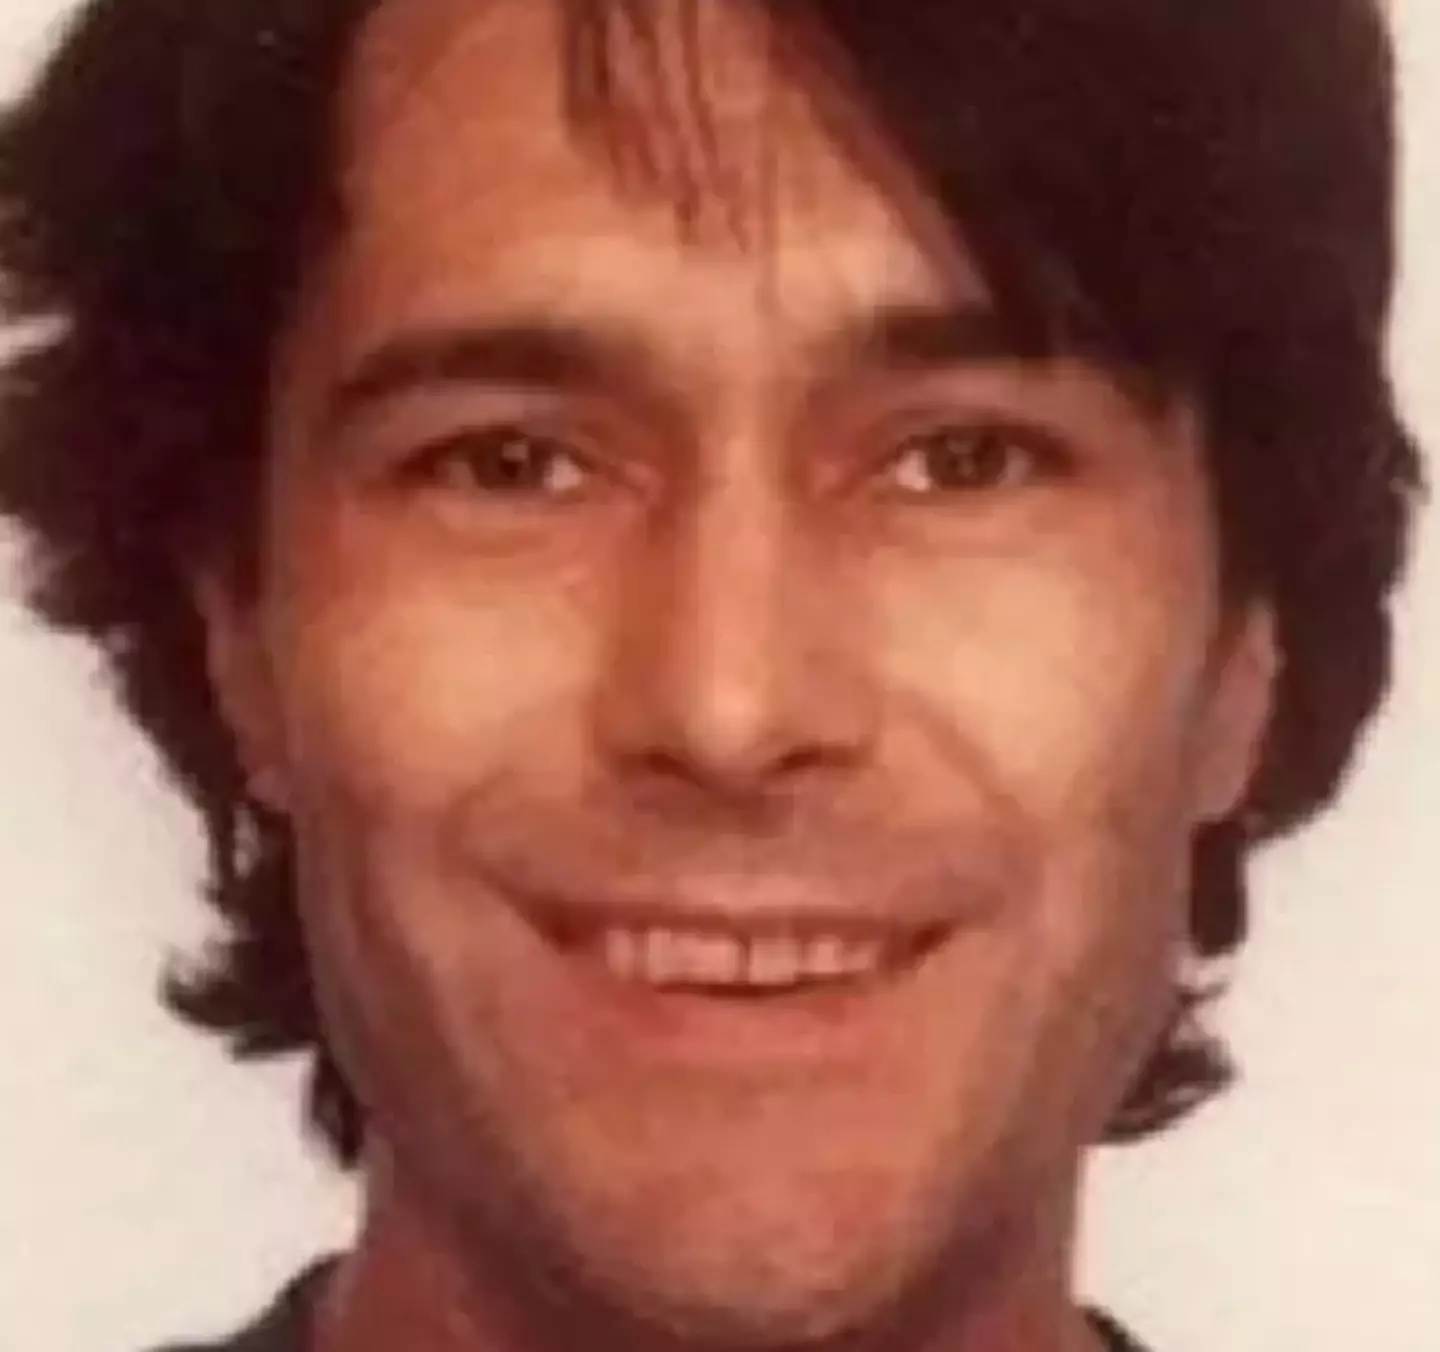 Russell Scozzi disappeared in May 2002.